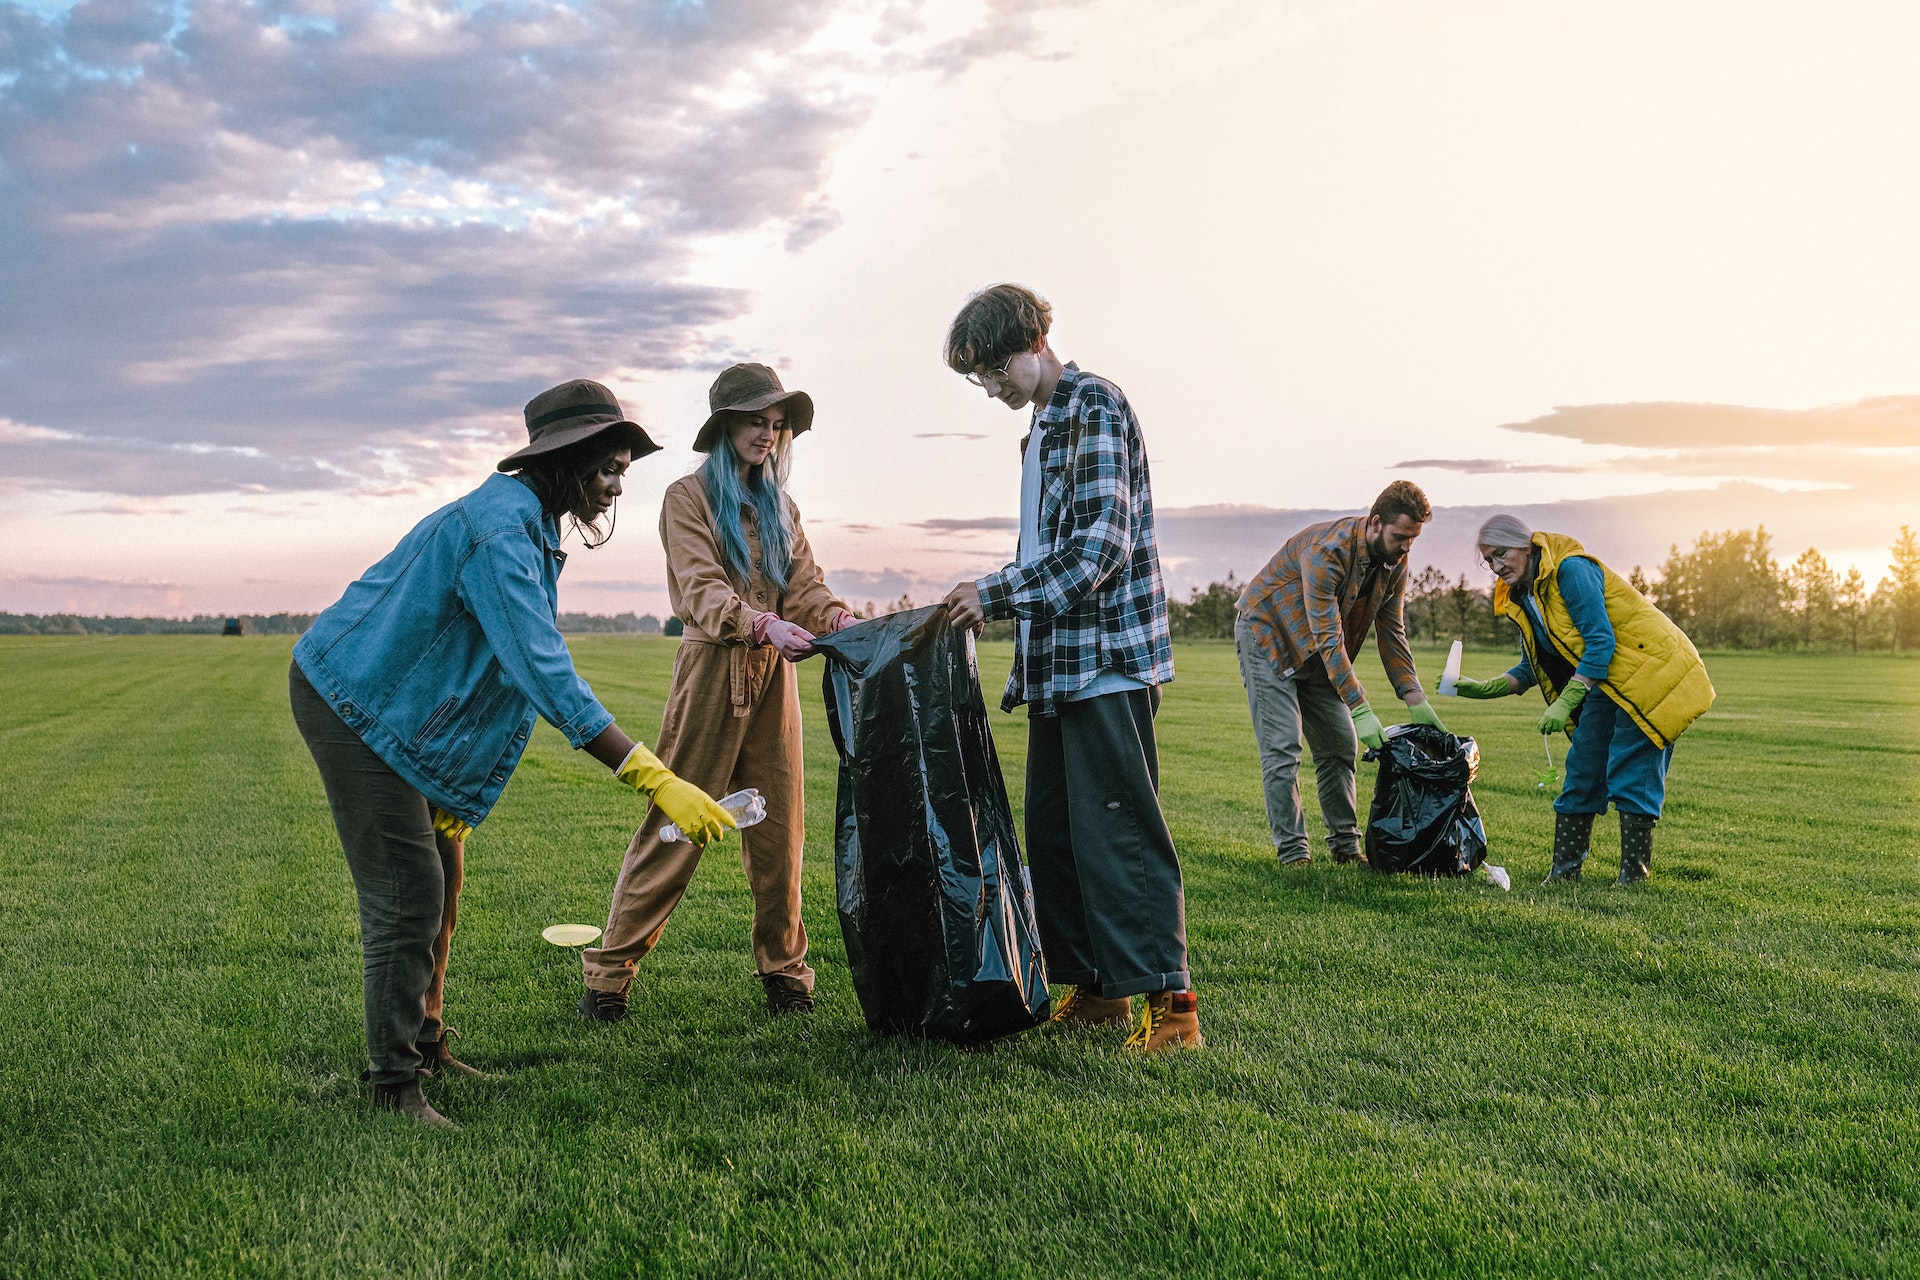 Photo by Anna Shvets: https://www.pexels.com/photo/volunteers-collecting-trash-on-green-grass-field-5029859/